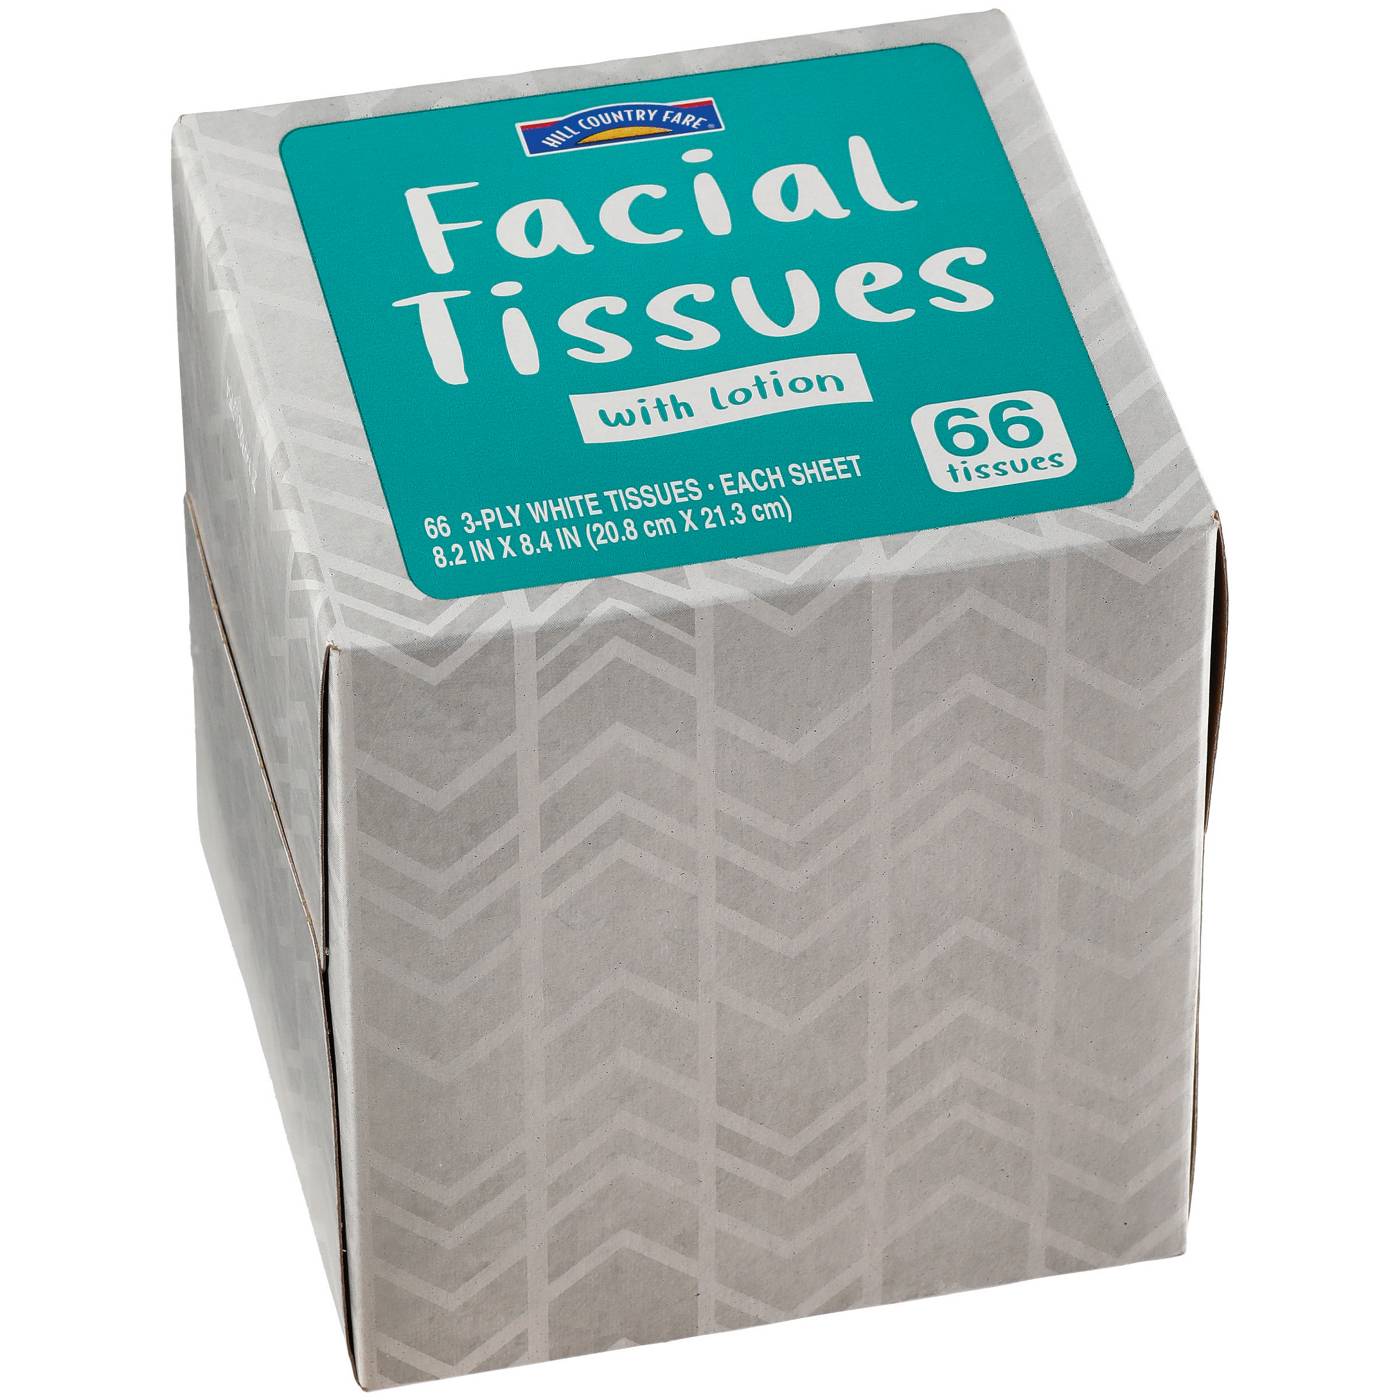 Hill Country Fare Lotion Facial Tissues; image 3 of 4